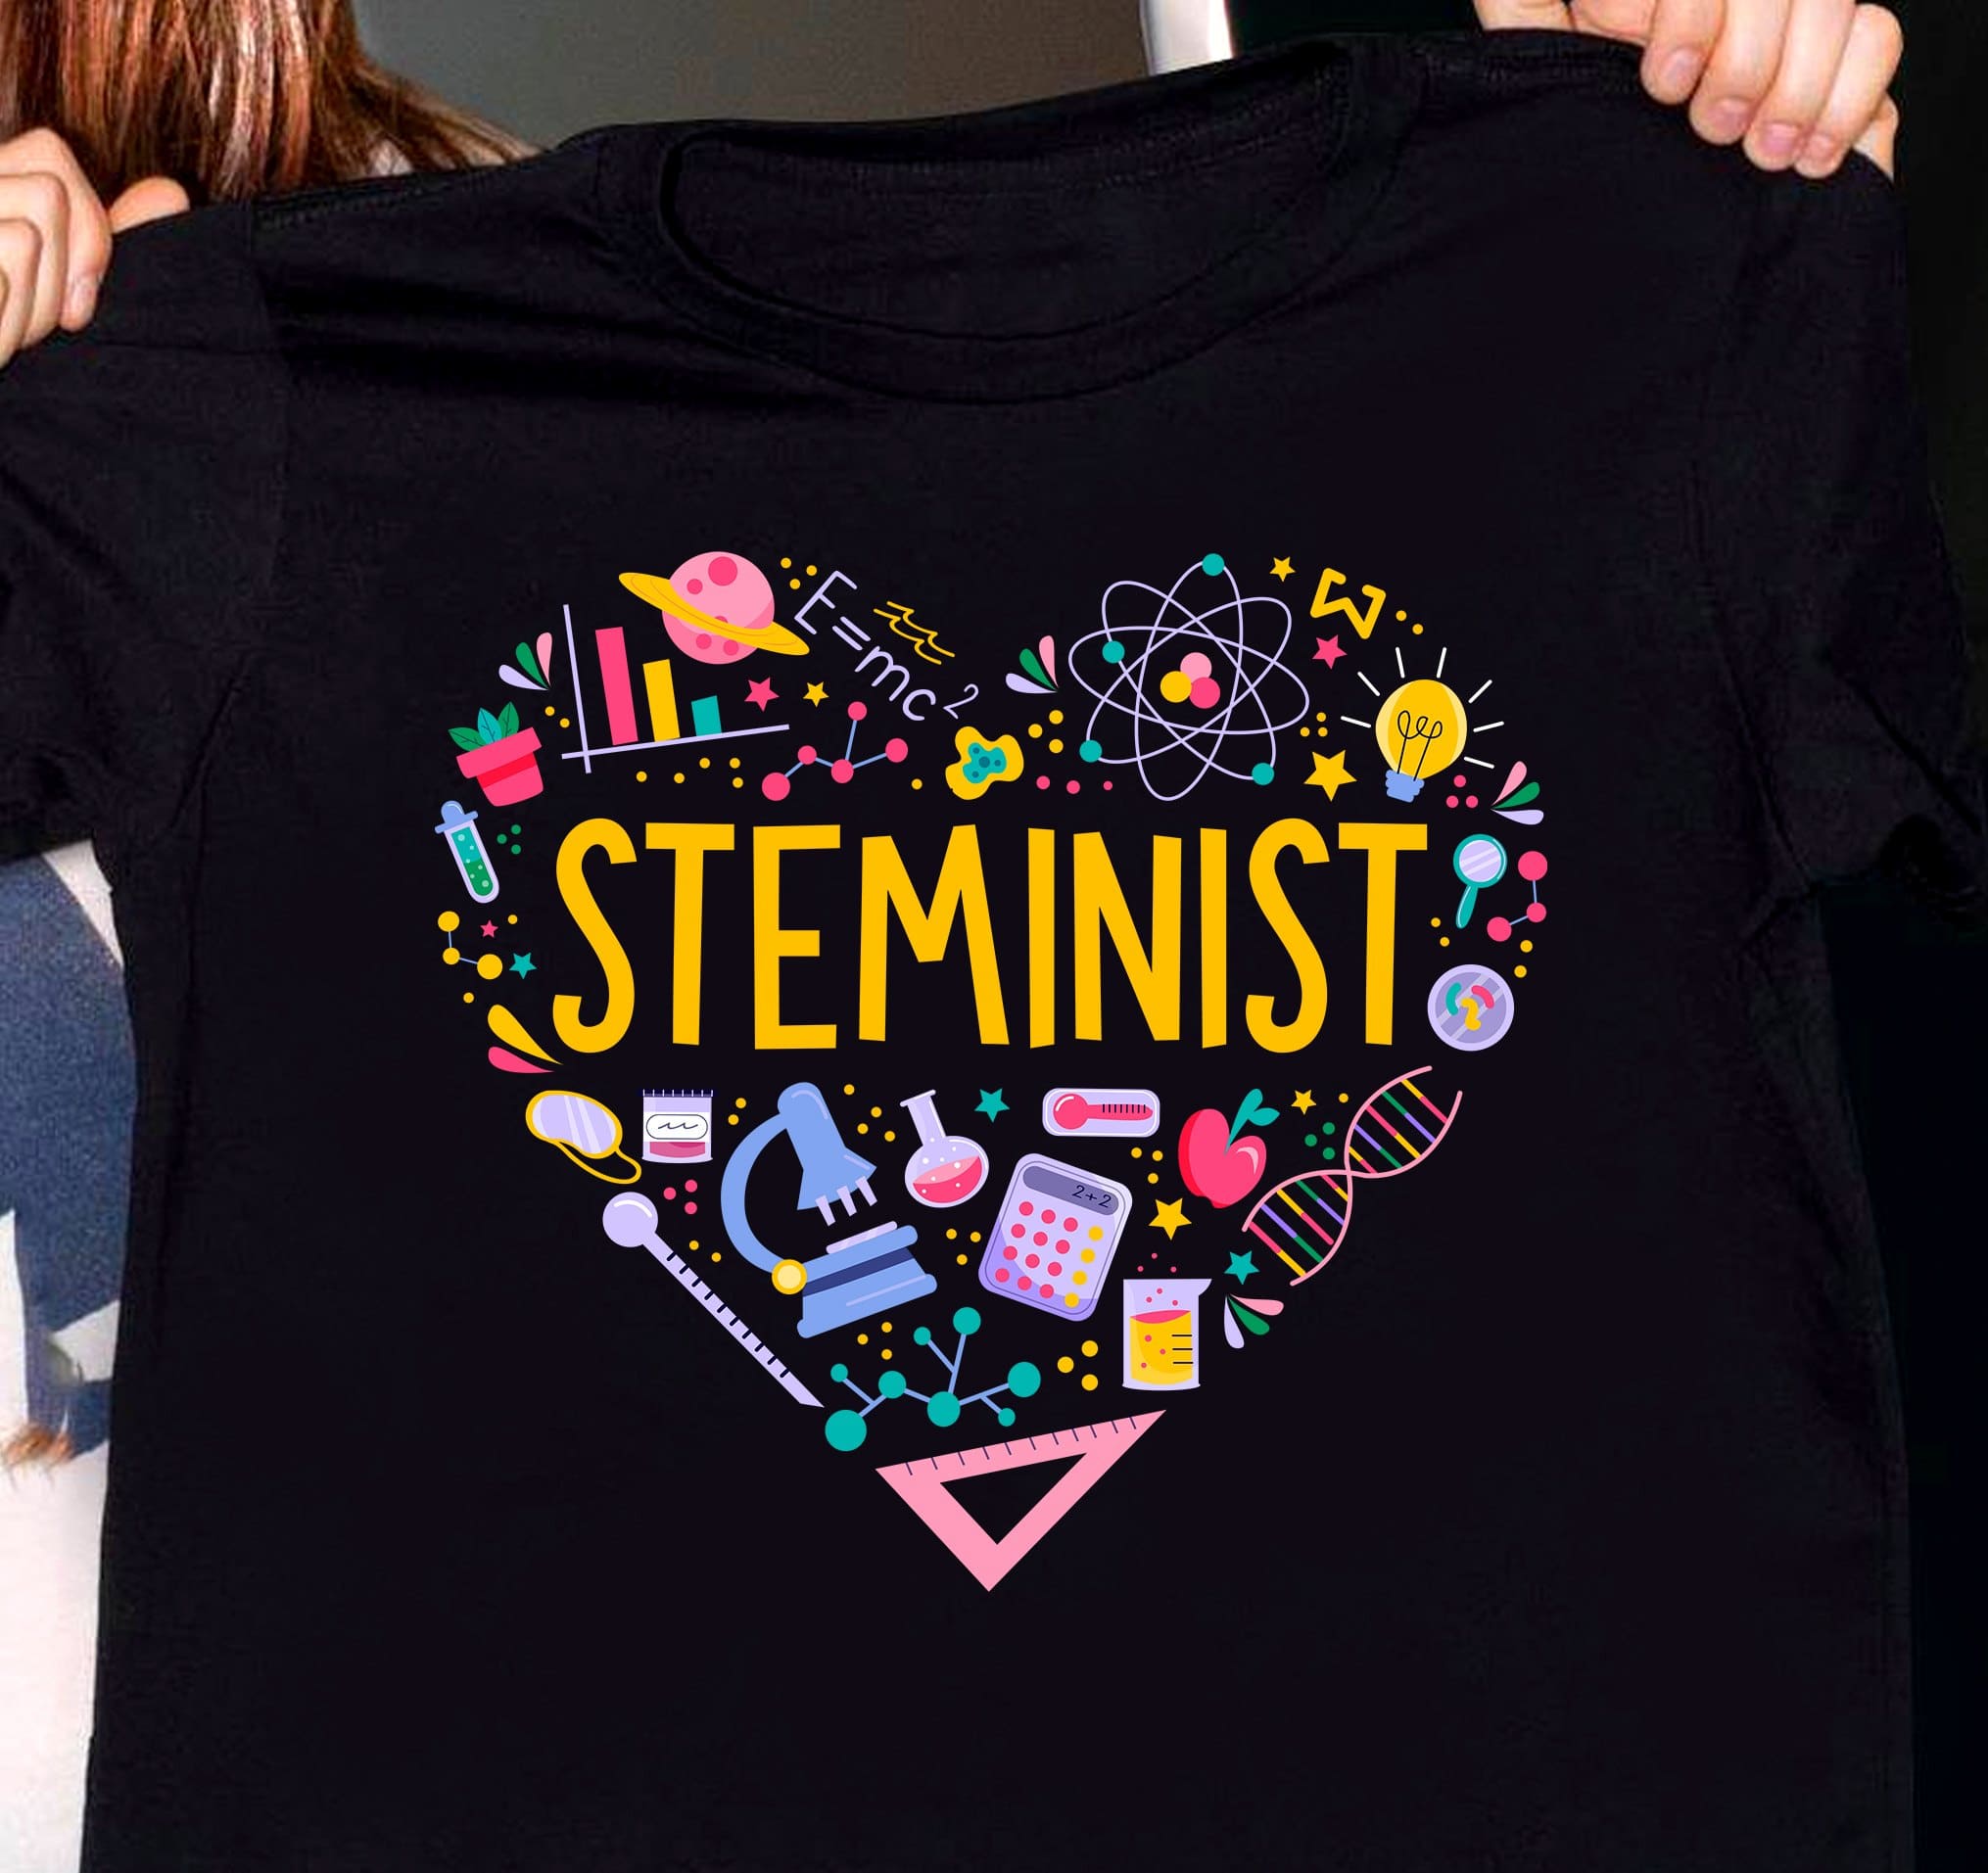 Steminist T-shirt - Gift for steminist, Steminist and science